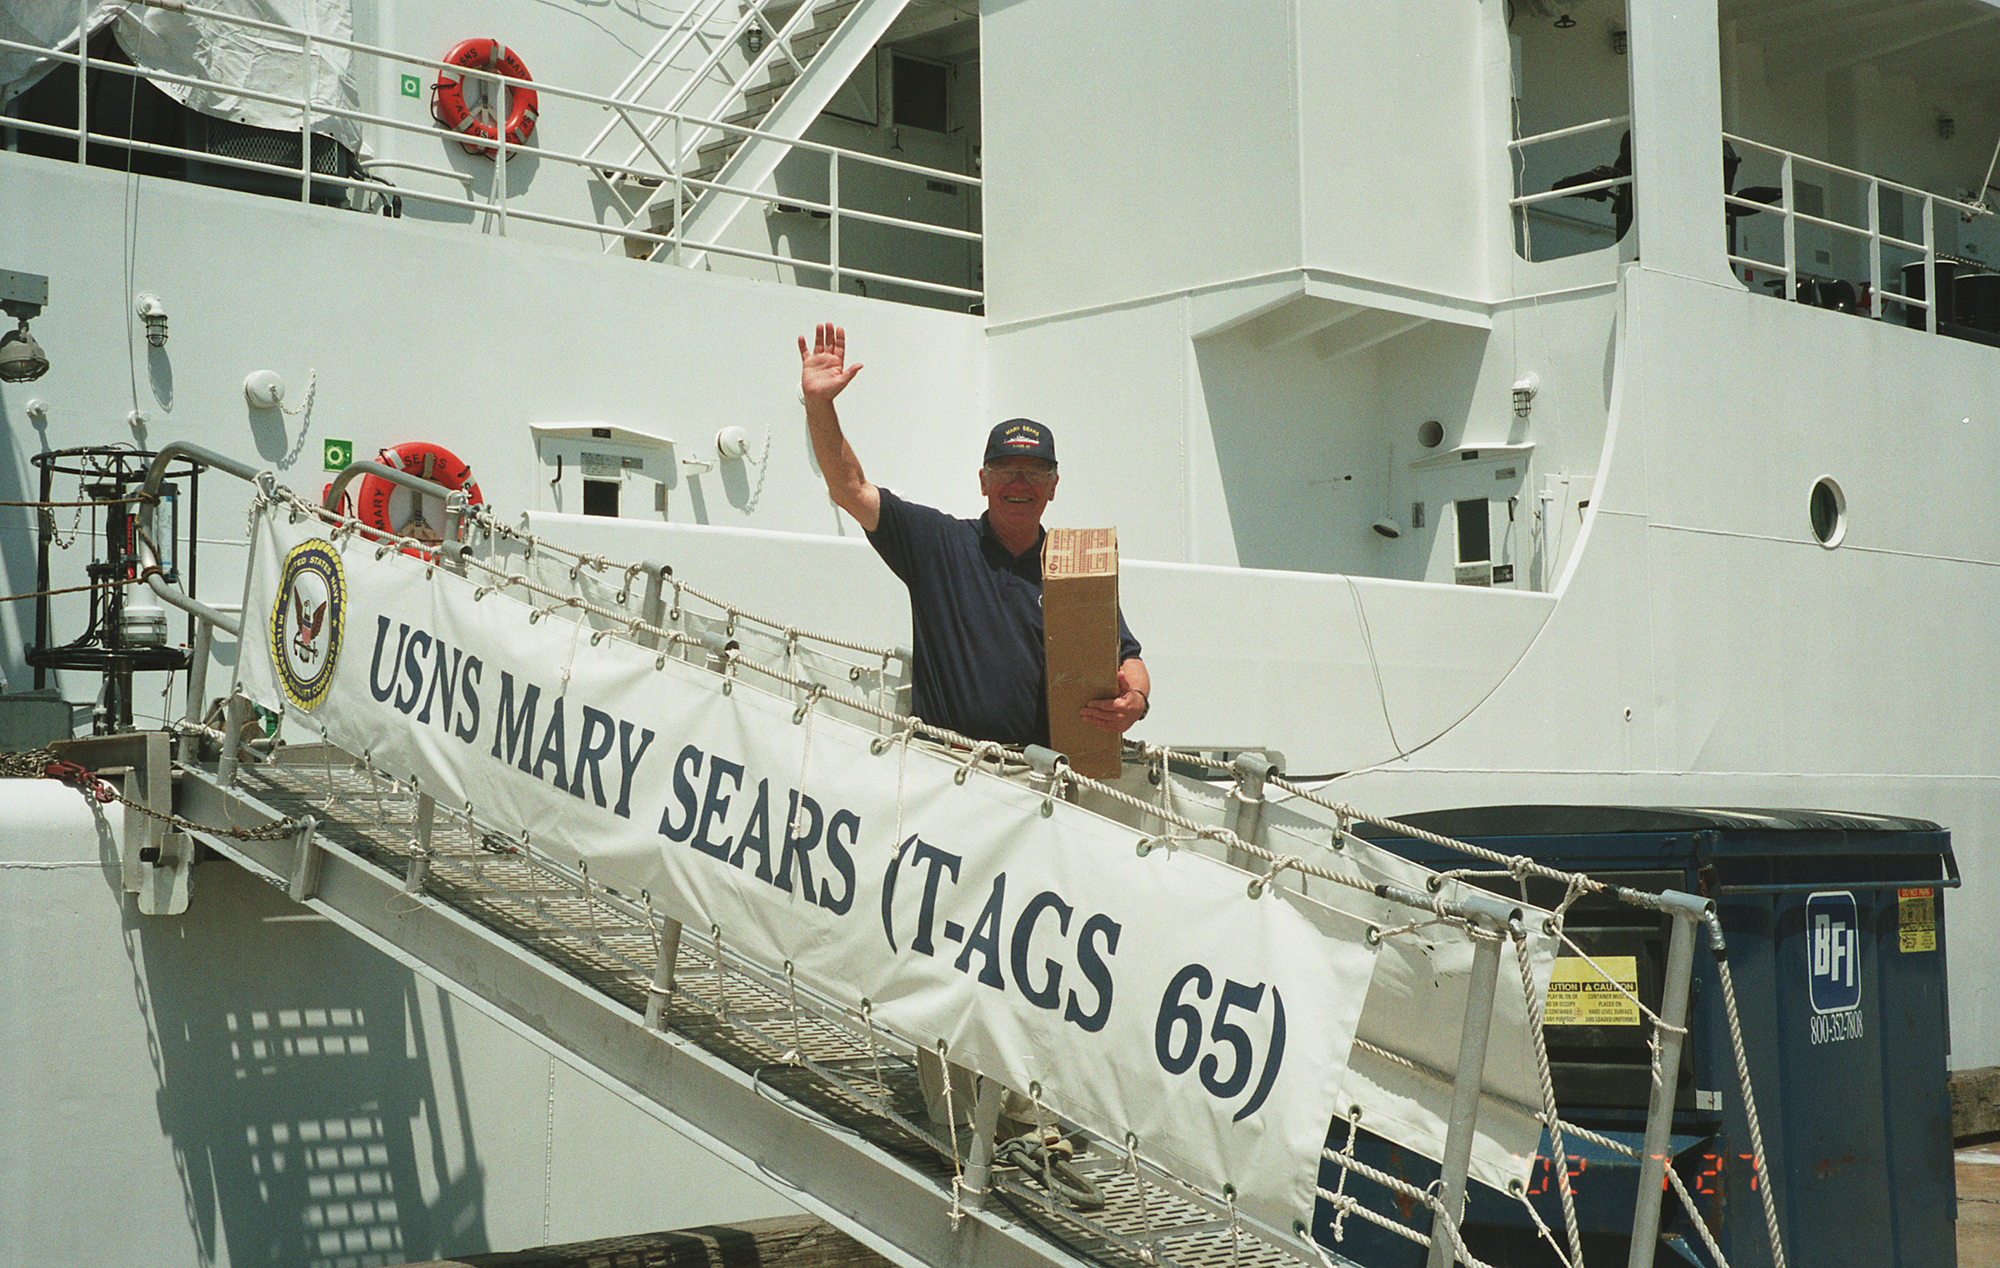 July 2002. USNS Mary Sears visits WHOI. Dick Pittenger on board the USNS Mary Sears.